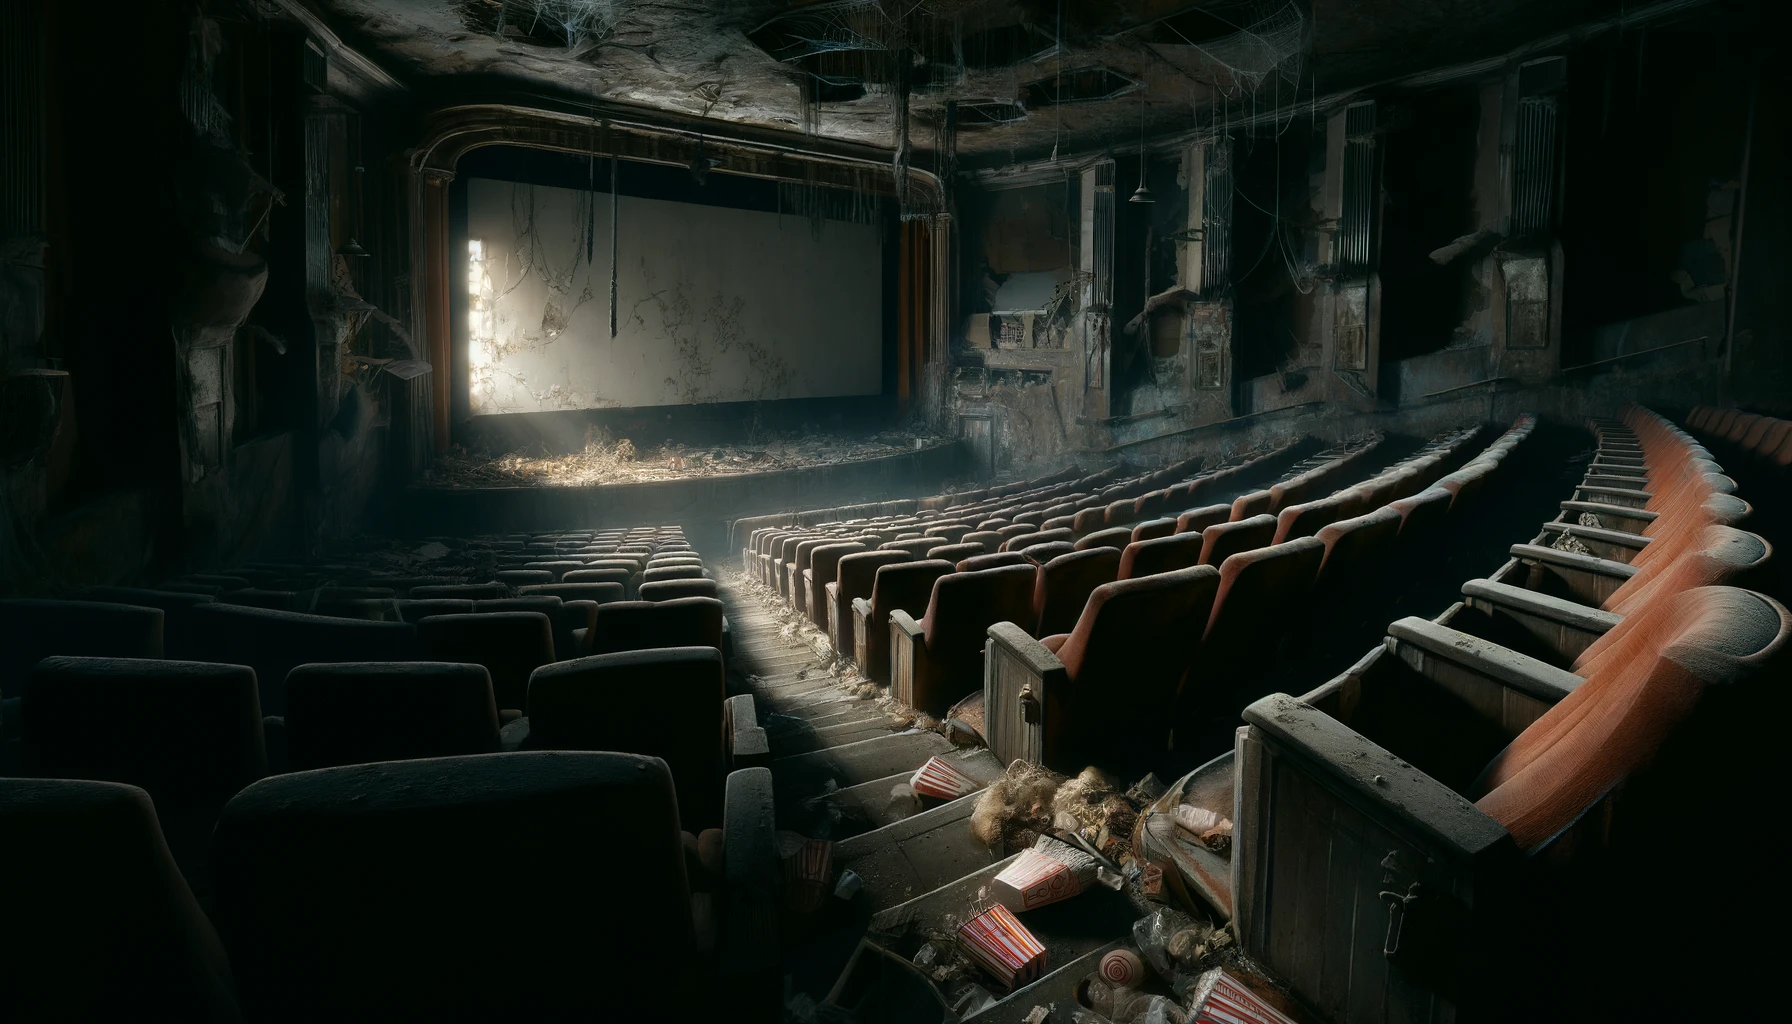 Acıklı Bir Soru: “En Son Ne Zaman Sinemaya Gittin?” 1 – DALL·E 2024 06 09 11.46.11 A detailed eerie scene of an abandoned movie theater. The theater has rows of old dusty seats with some of them torn. The large movie screen is crac